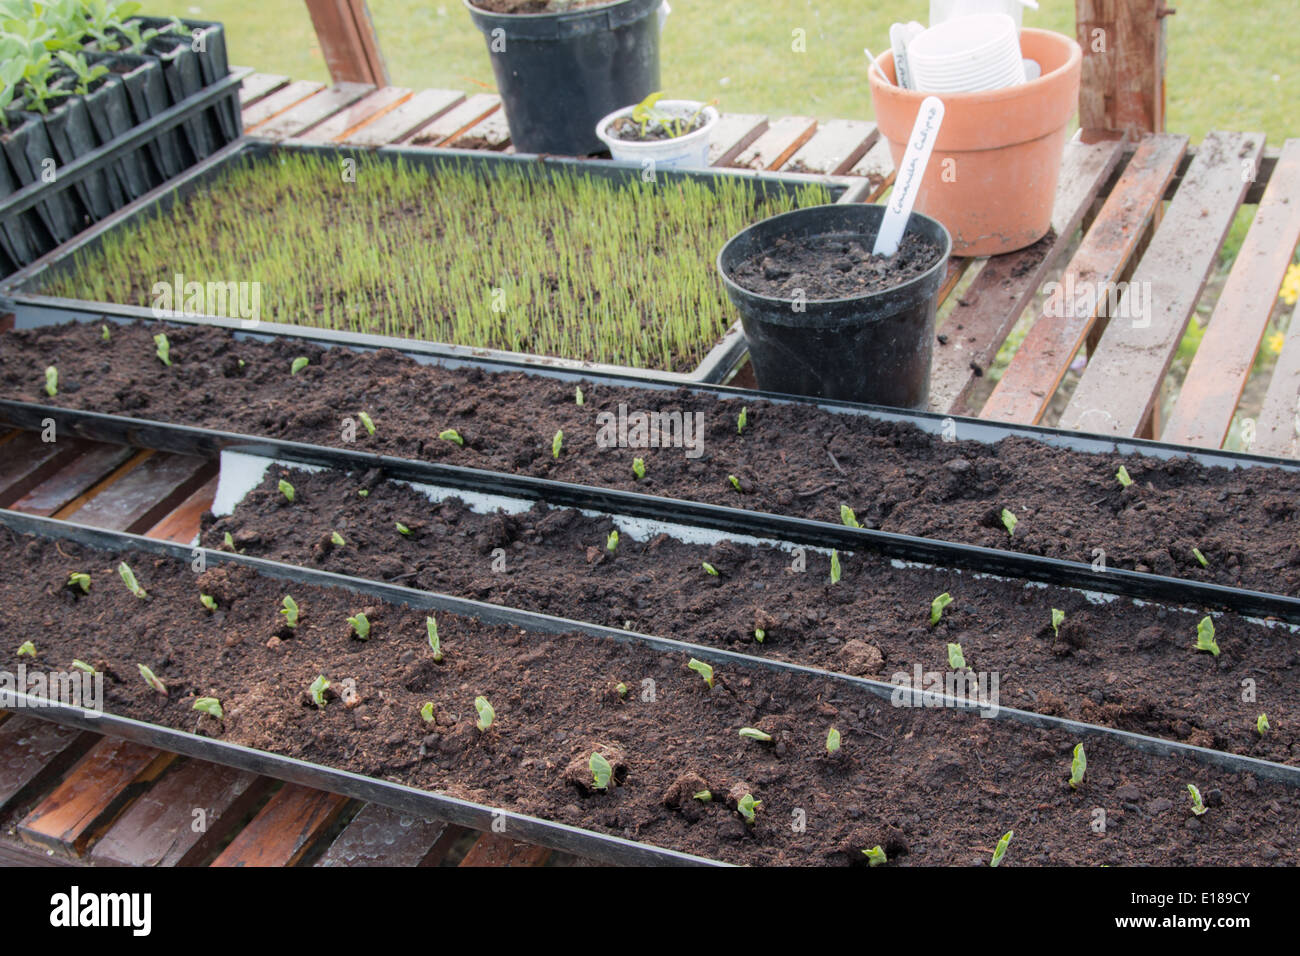 A  greenhouse bench showing growing young plants, peas sown in guttering (6 of 7) Stock Photo